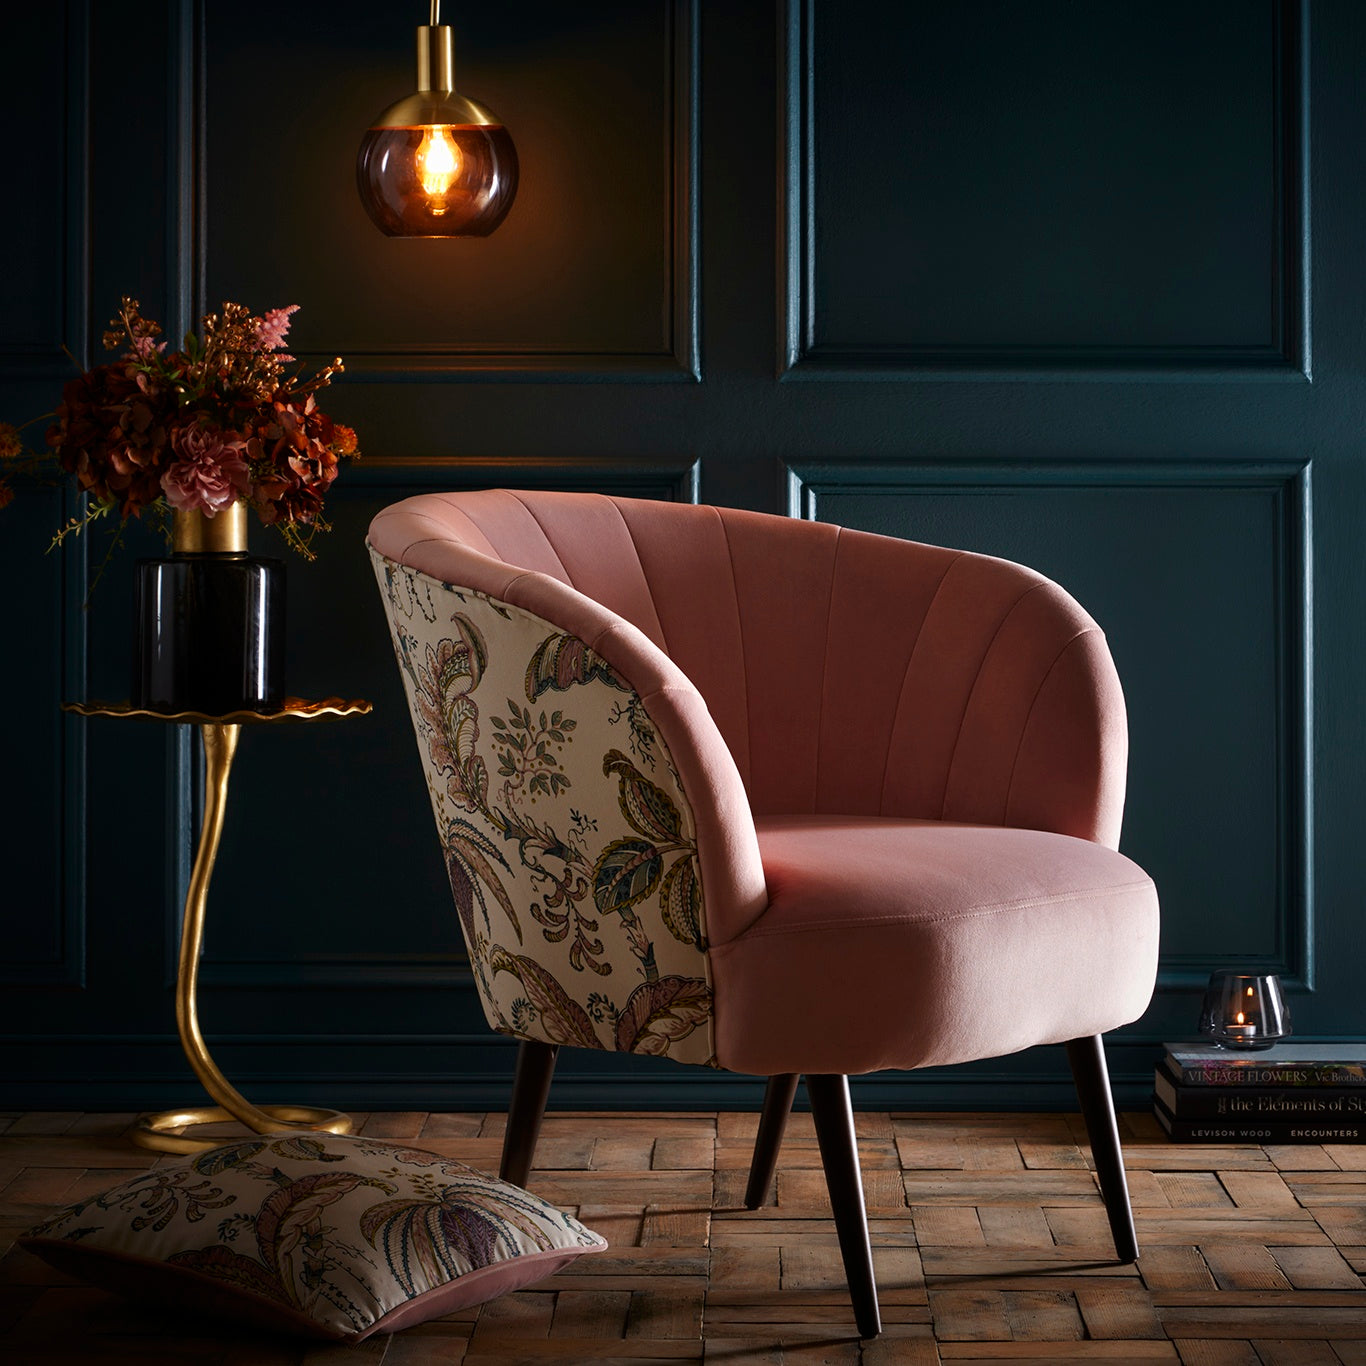 Prague Ophelia Chair - Limited Stock